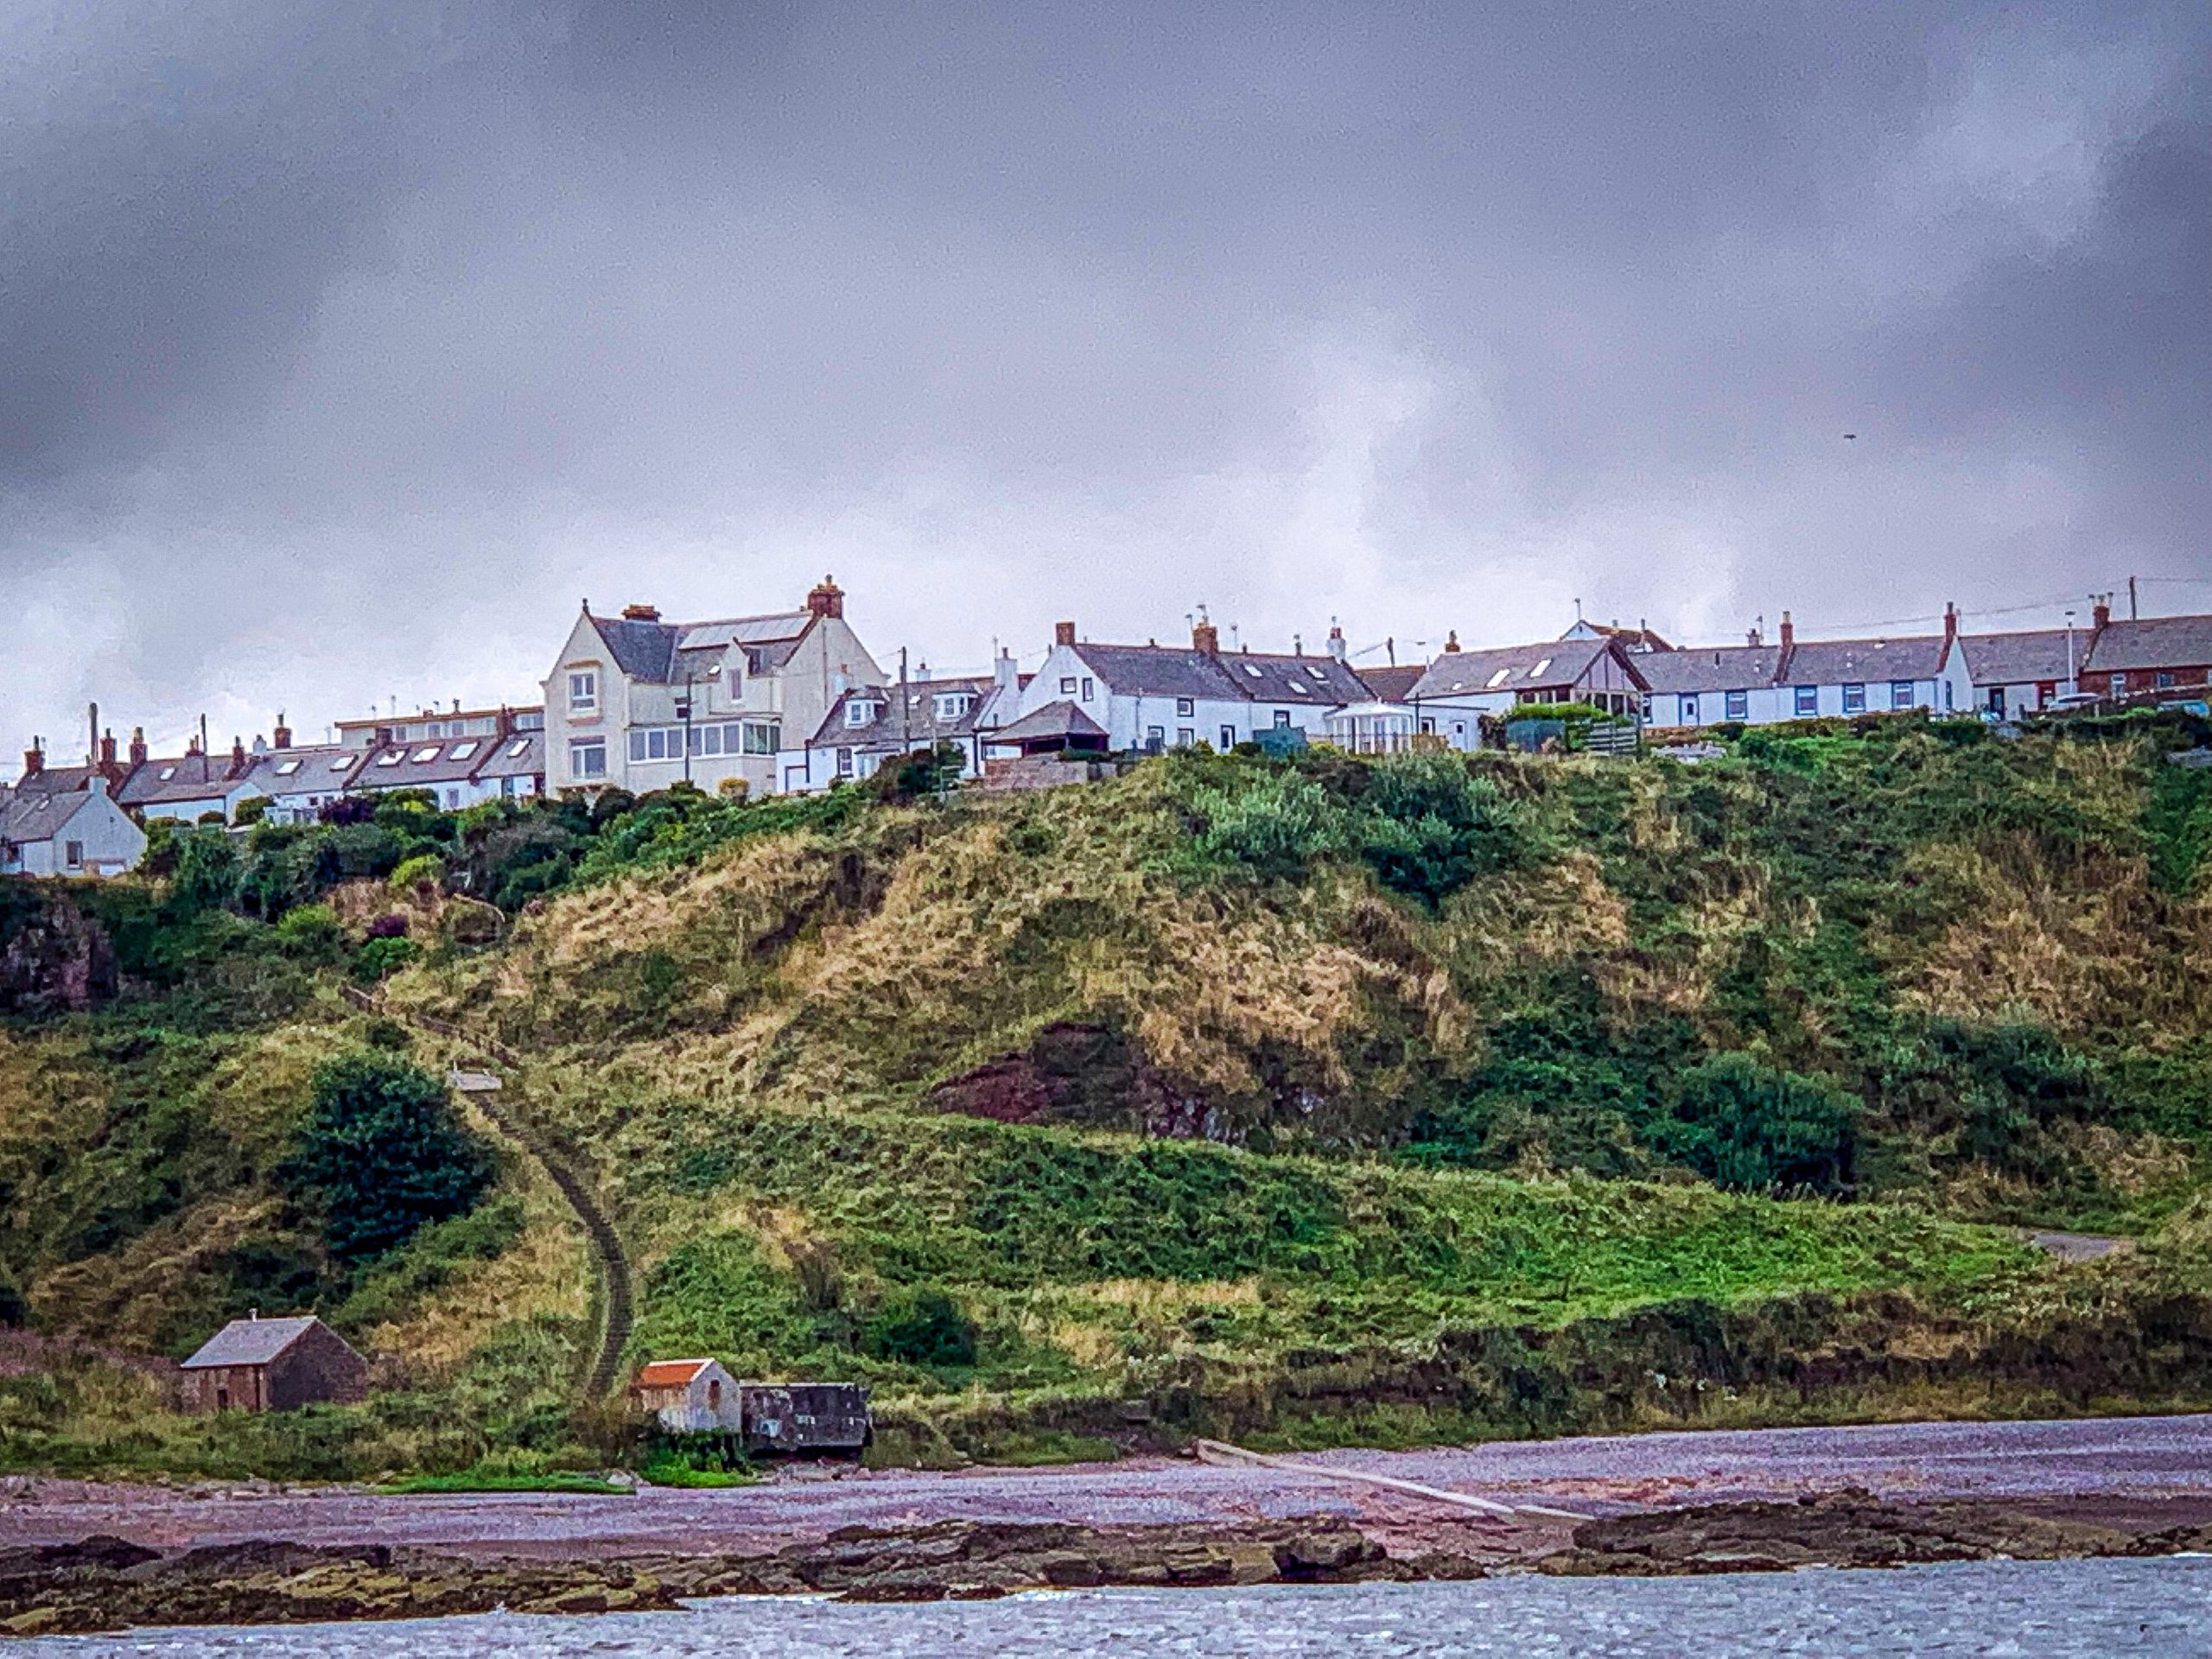 auchmithie, arbroath pic : Kerstin Rodgers